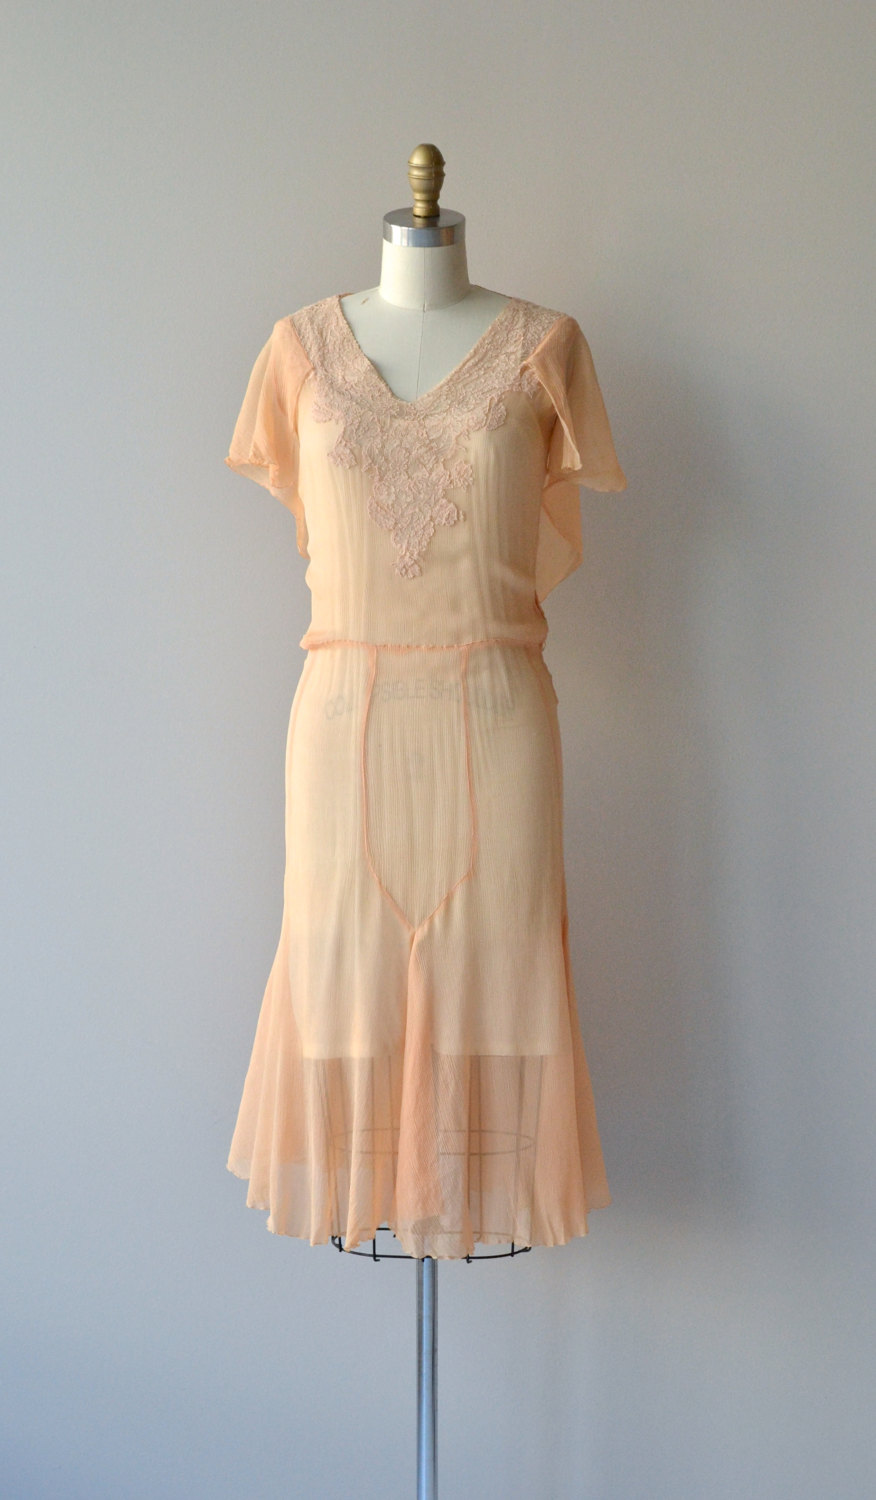 1920s Bridesmaid Dresses - The Gaiety Dress from Dear Golden